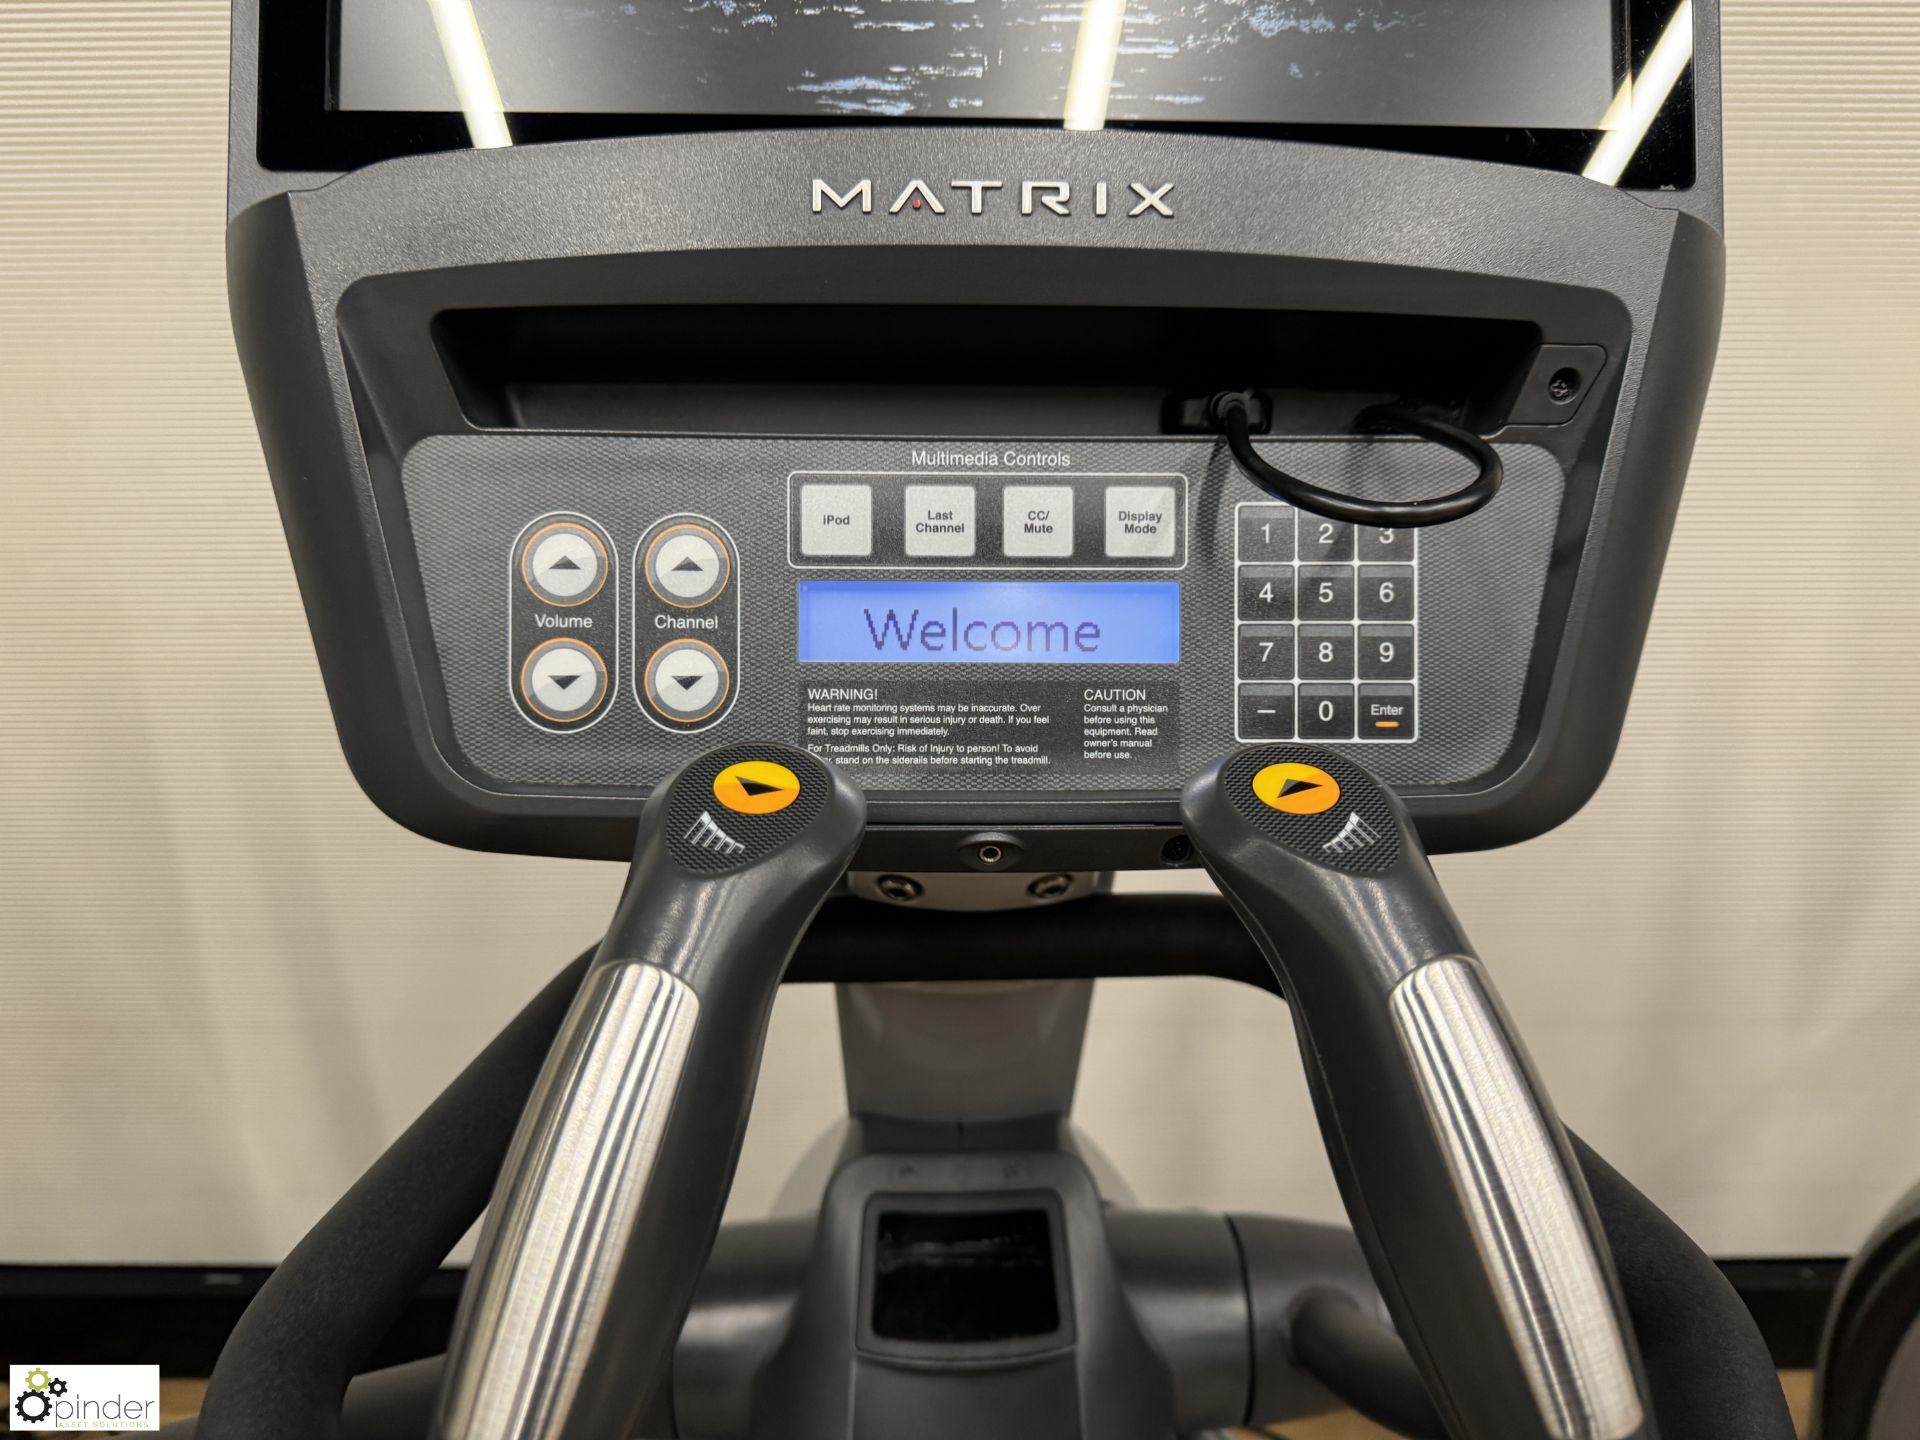 Matrix Cross Trainer, serial number EP304B150612252 (location in building – basement) - Image 5 of 6